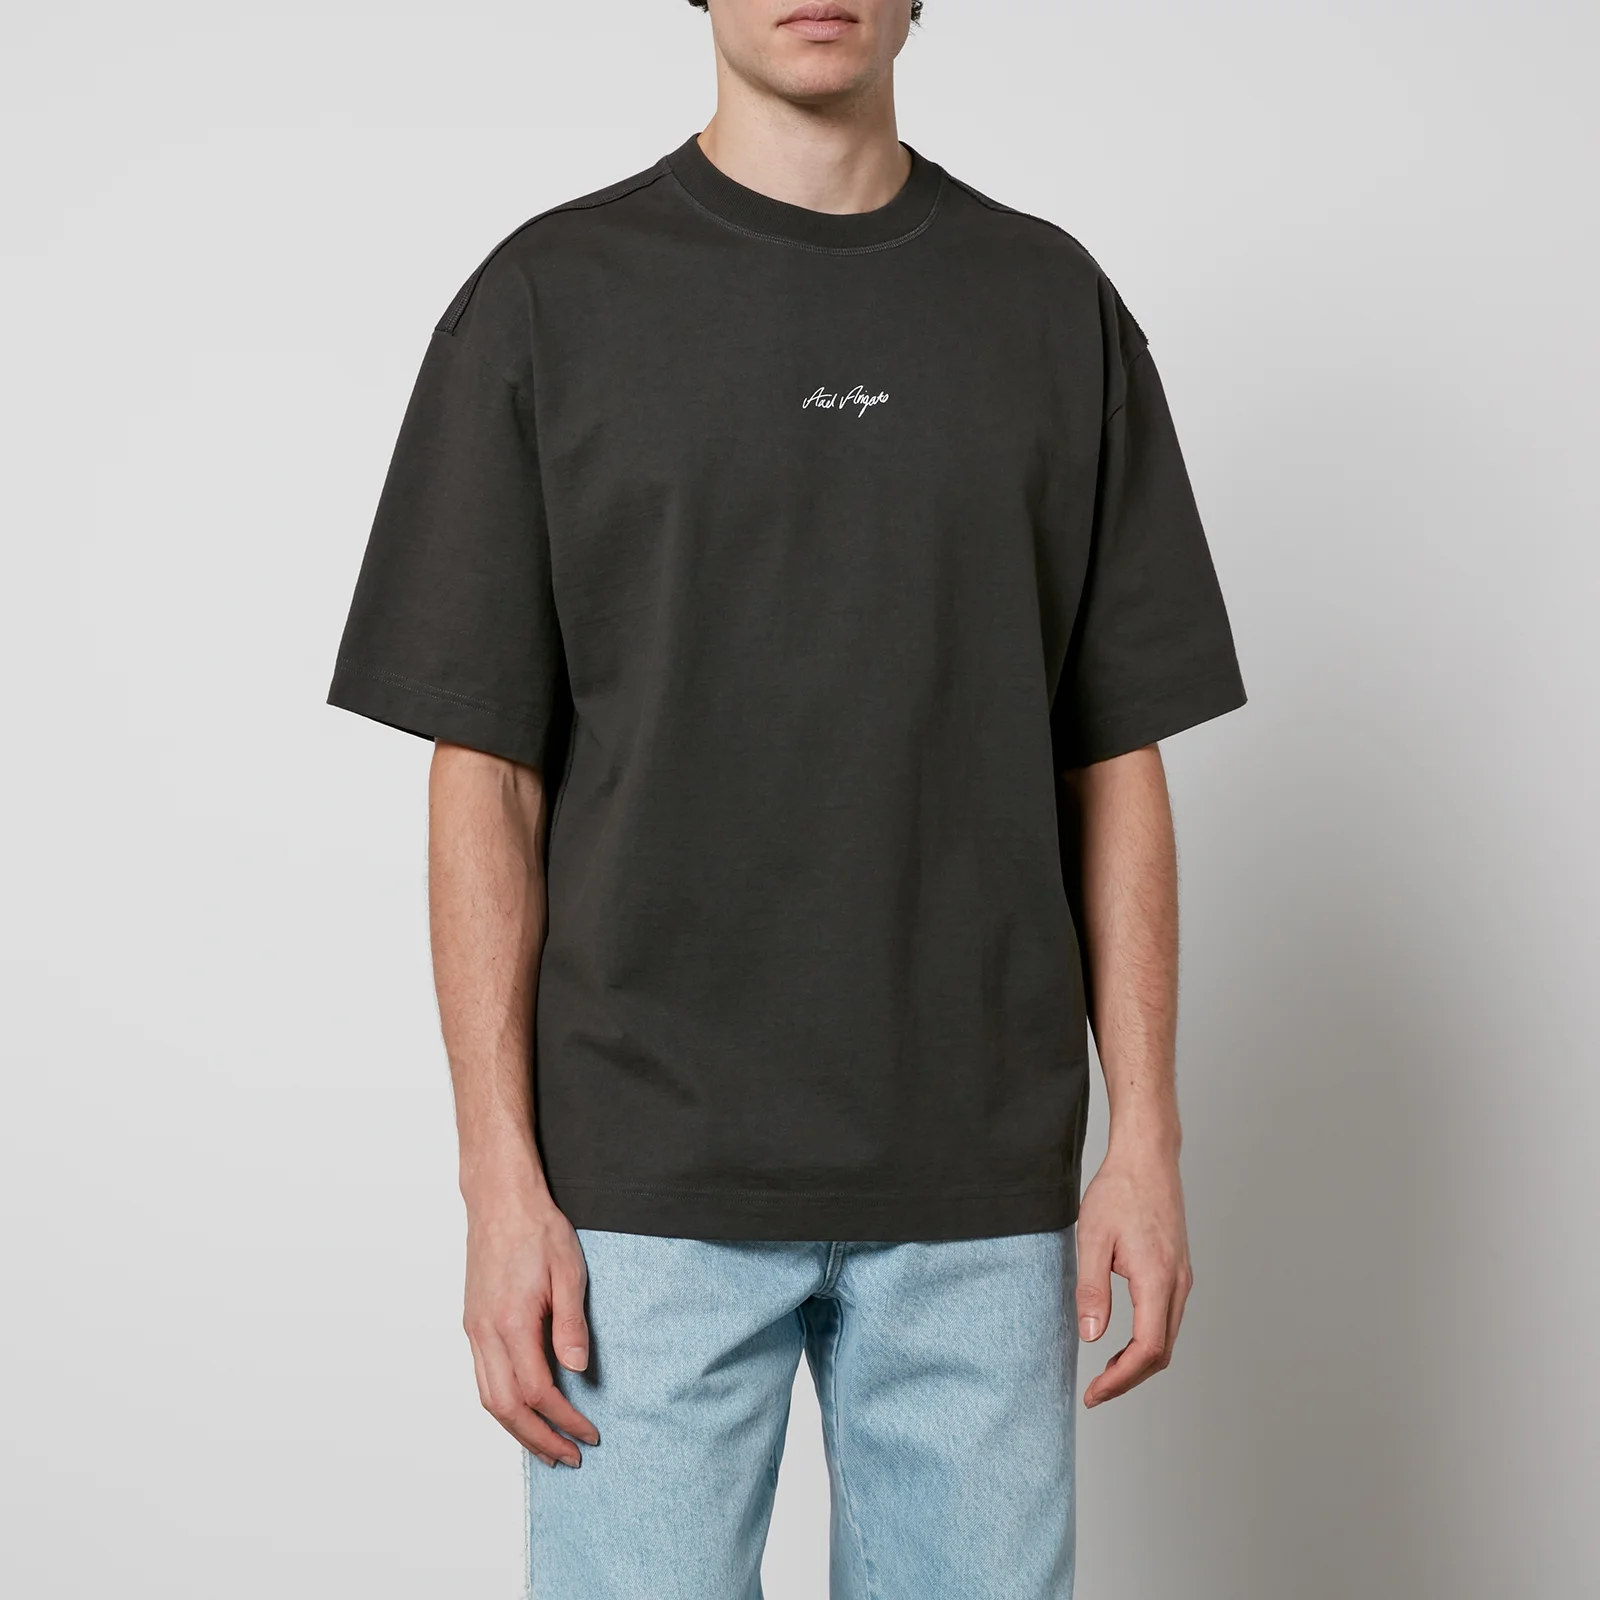 Axel Arigato Sketch Cotton-Jersey T-Shirt - S Image 1